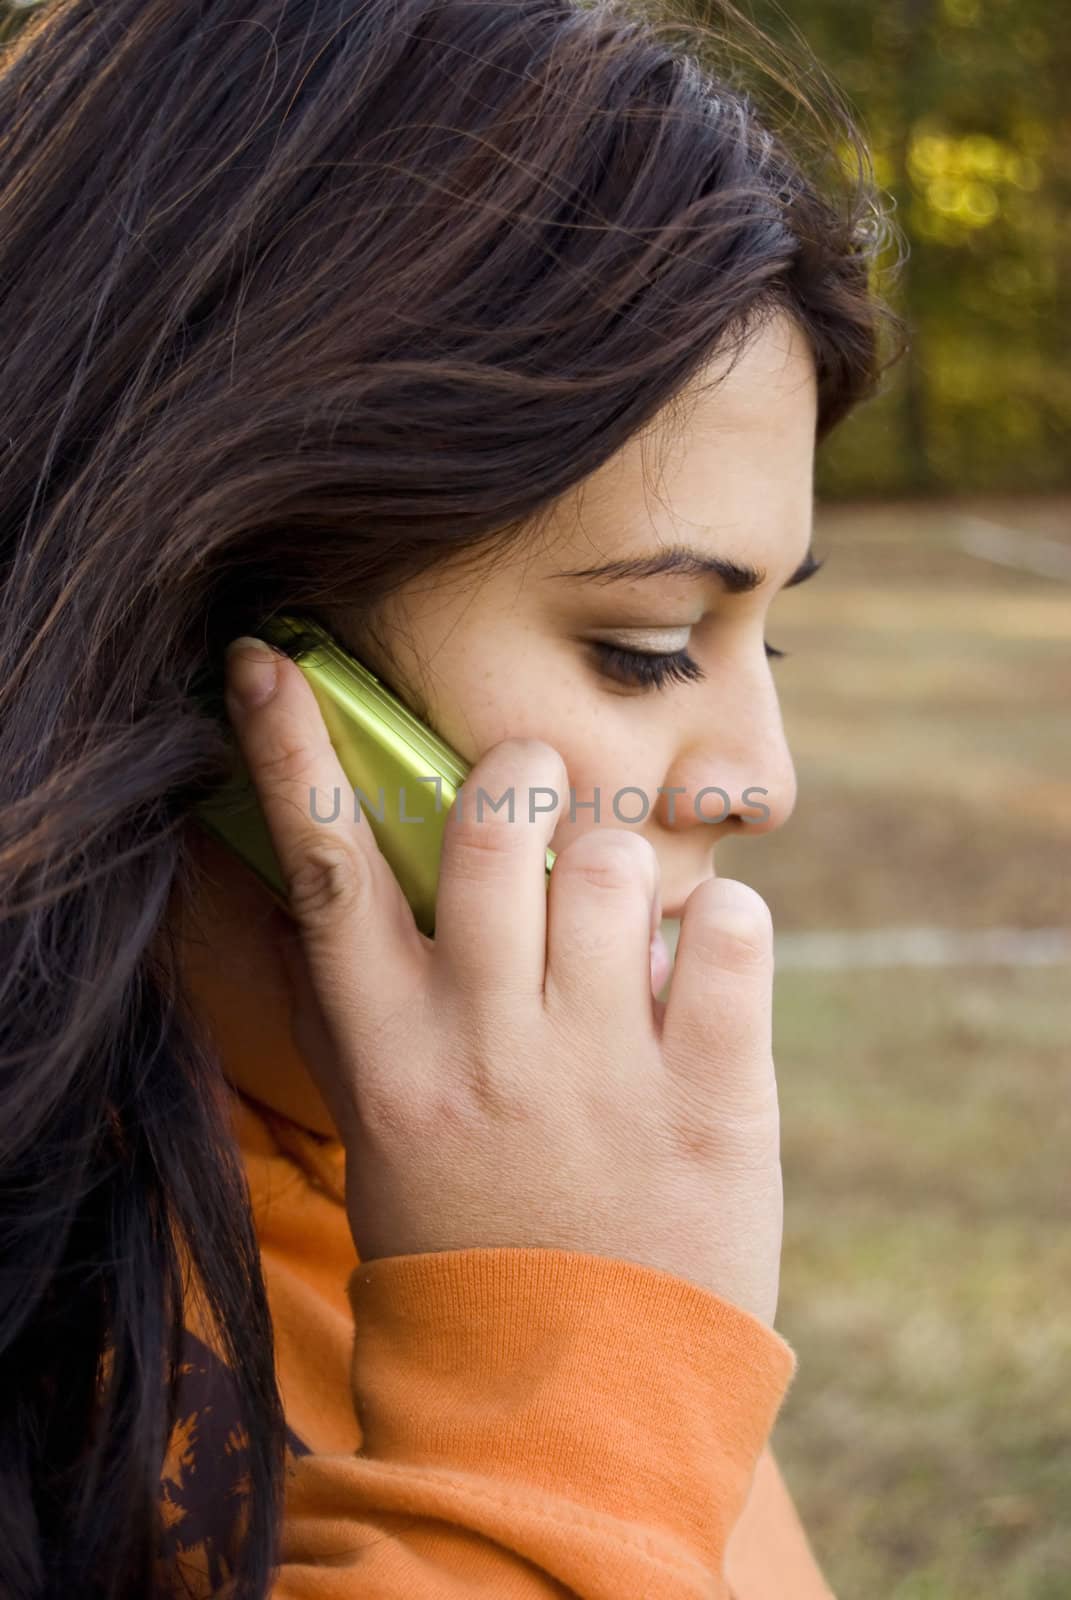 A beautiful young woman of latin descent talking on a cell phone.